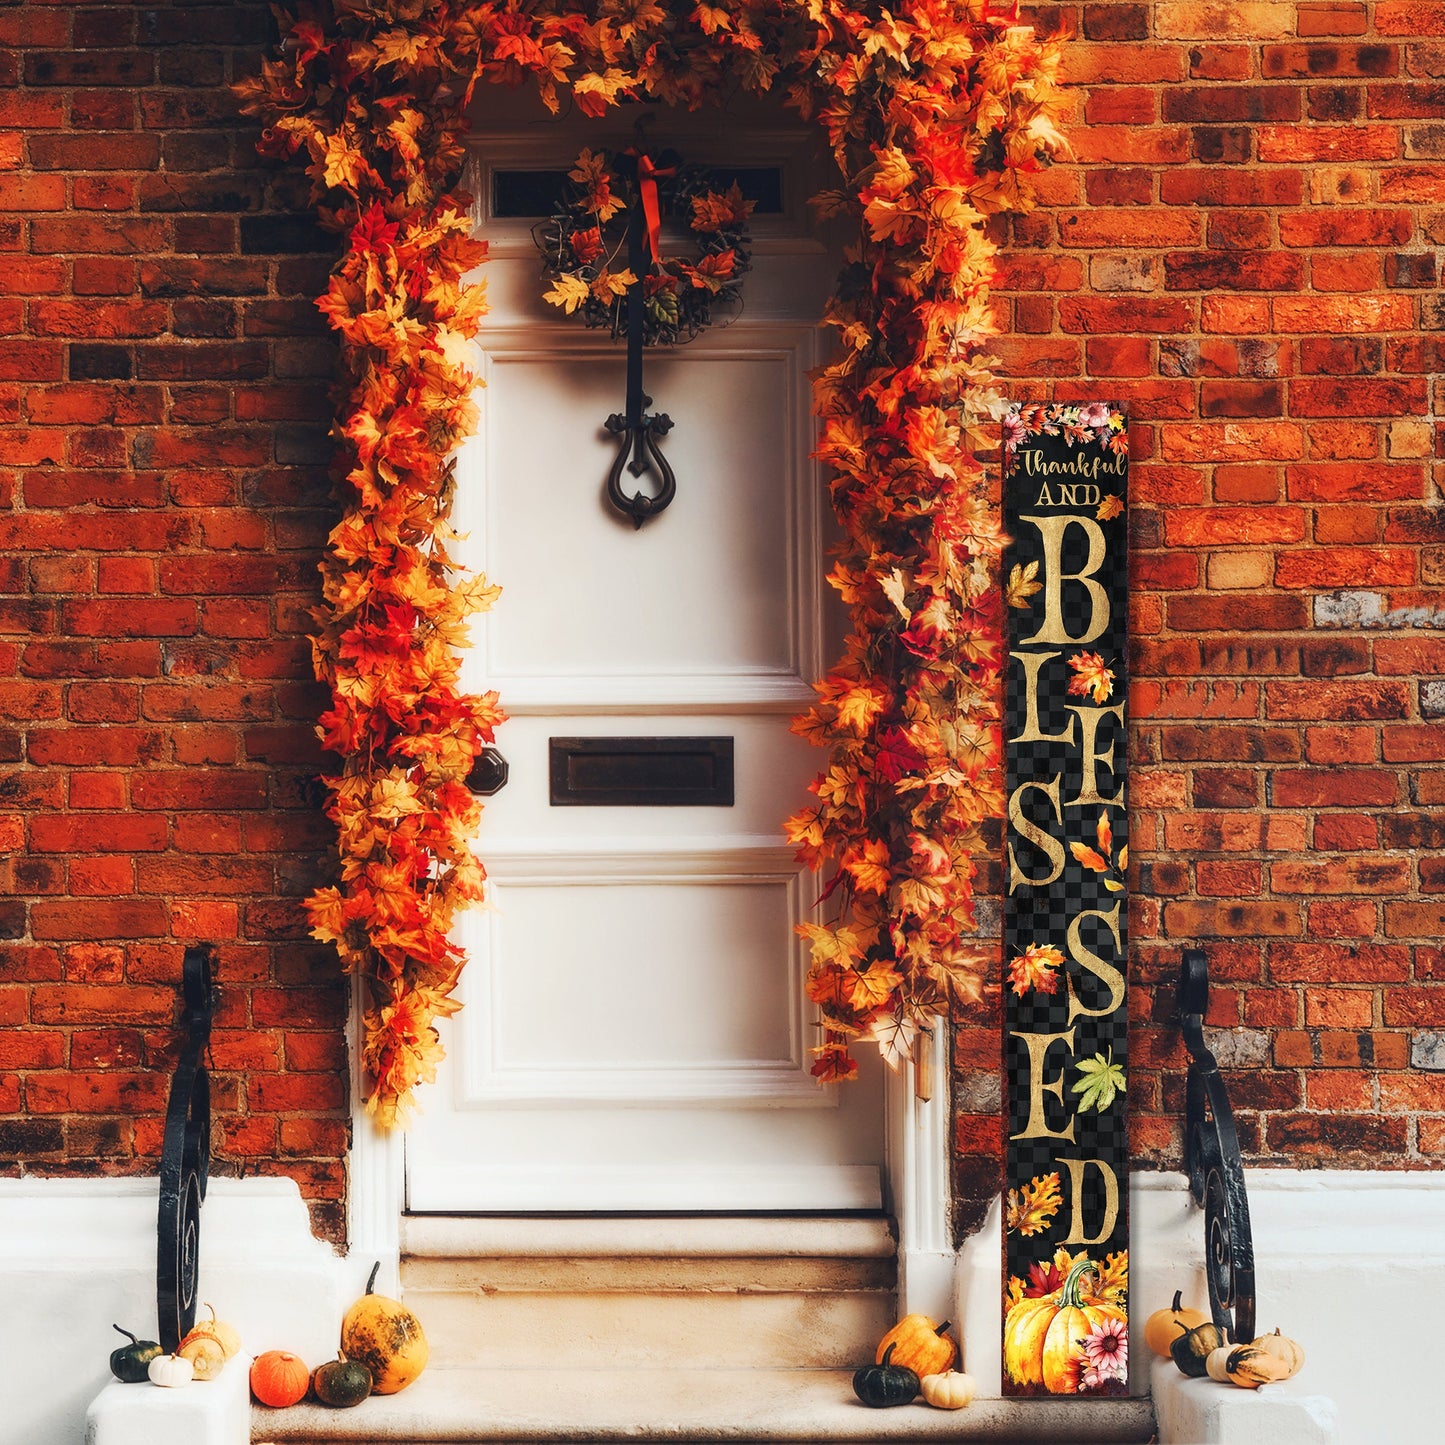 72in "Thankful and Blessed" Fall Welcome Porch Sign - Front Door Decor for Seasonal Celebrations, Vintage Fall Decoration